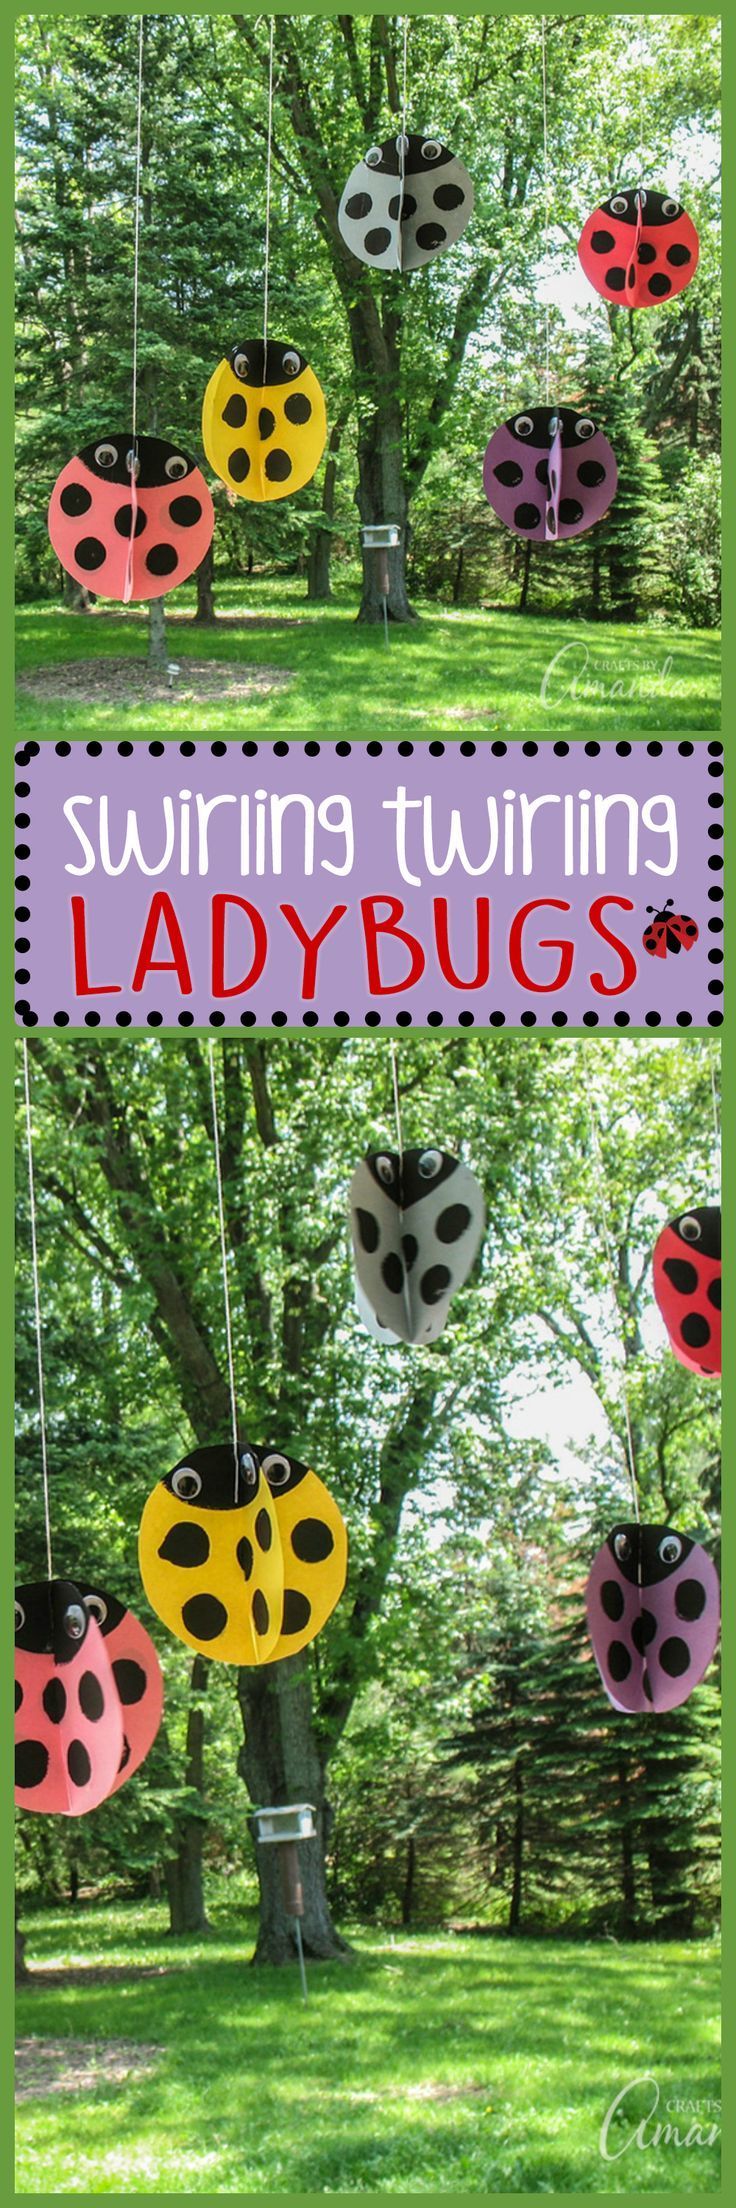 These adorable twirling ladybugs are a great summer kids craft! These ladybugs are easy to make and look so cute swirling and